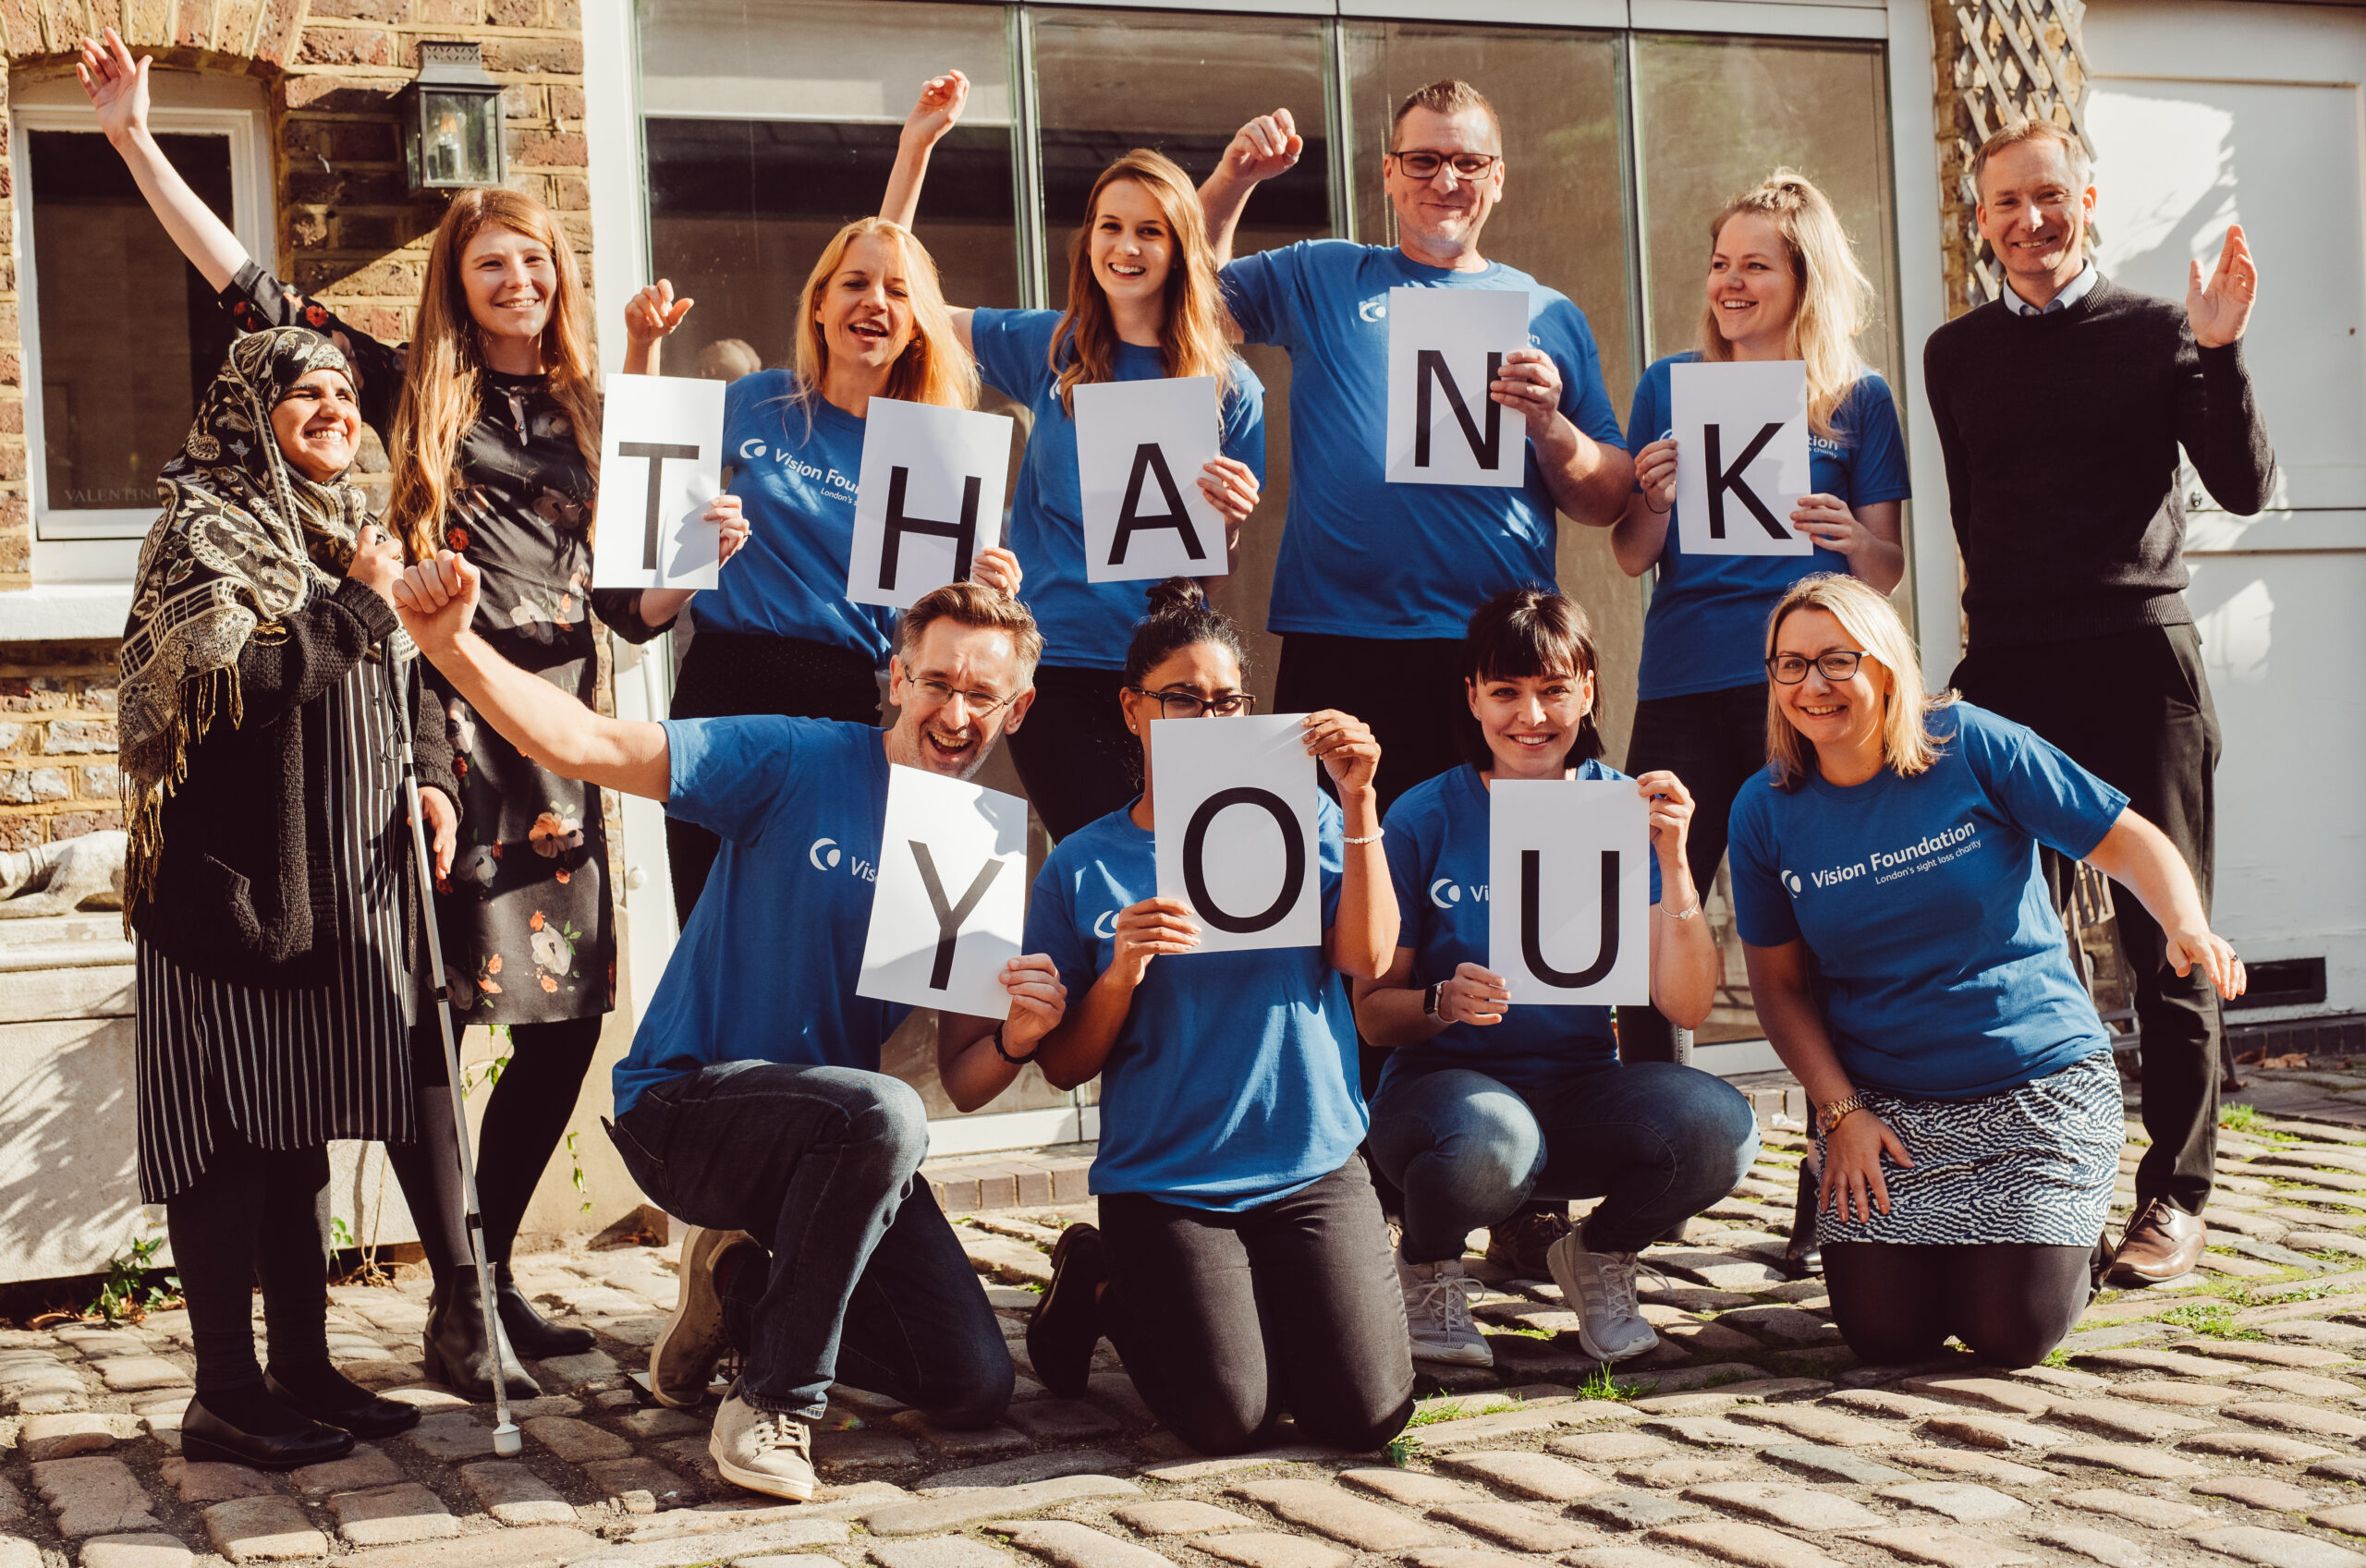 Image shows the Vision Foundation team holding up a 'Thank you' sign